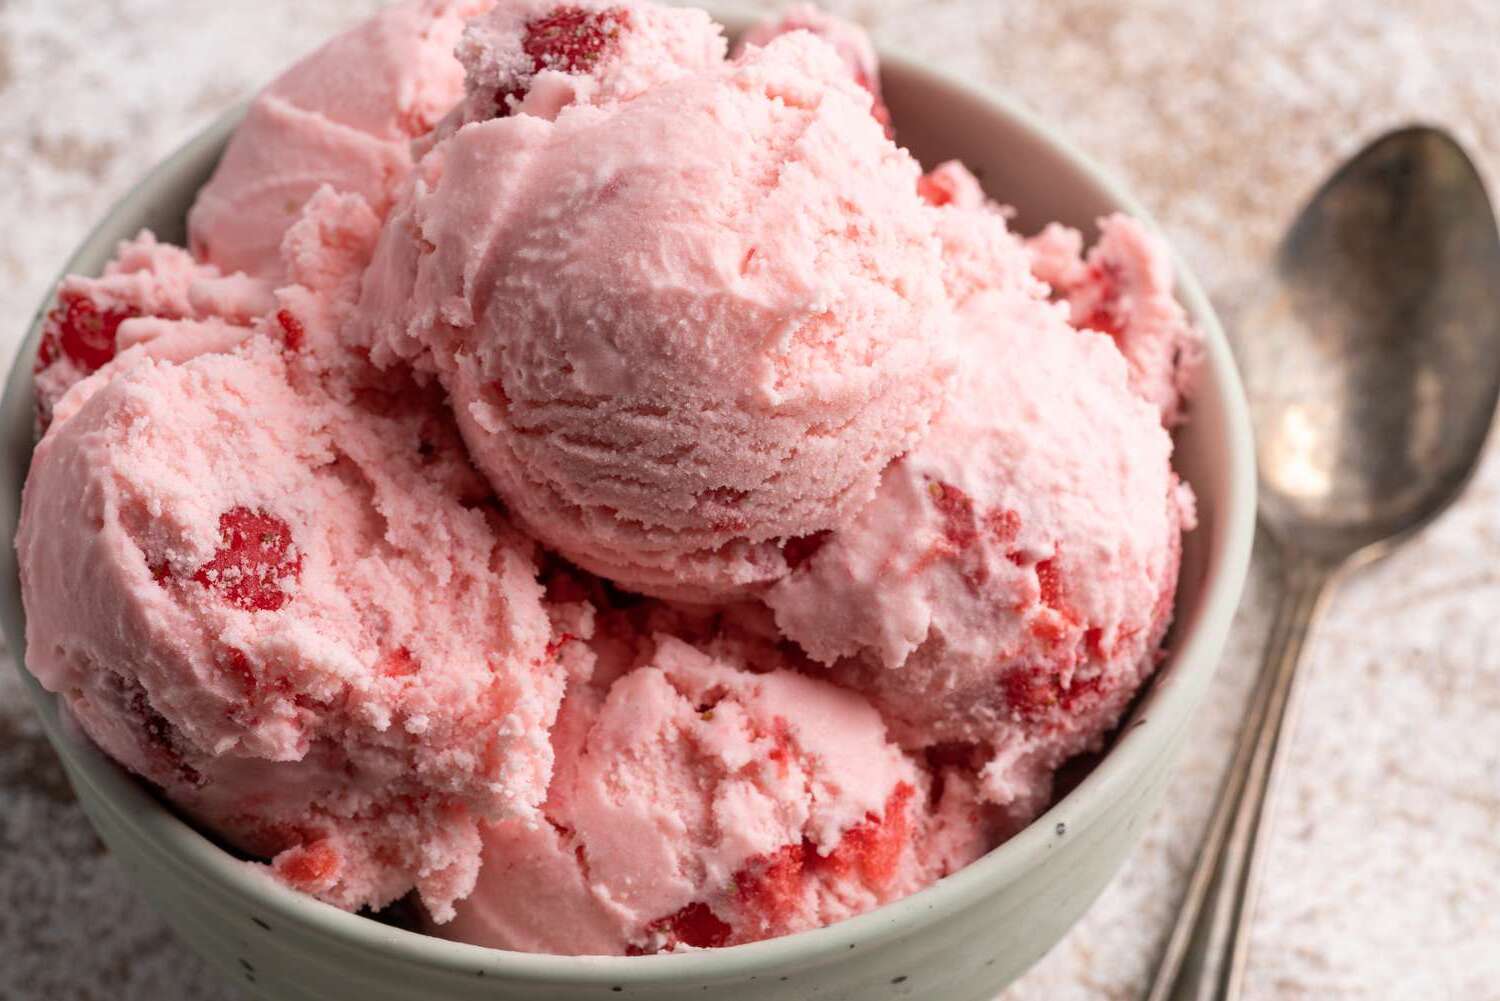 12-cool-facts-about-ice-cream-you-didnt-know